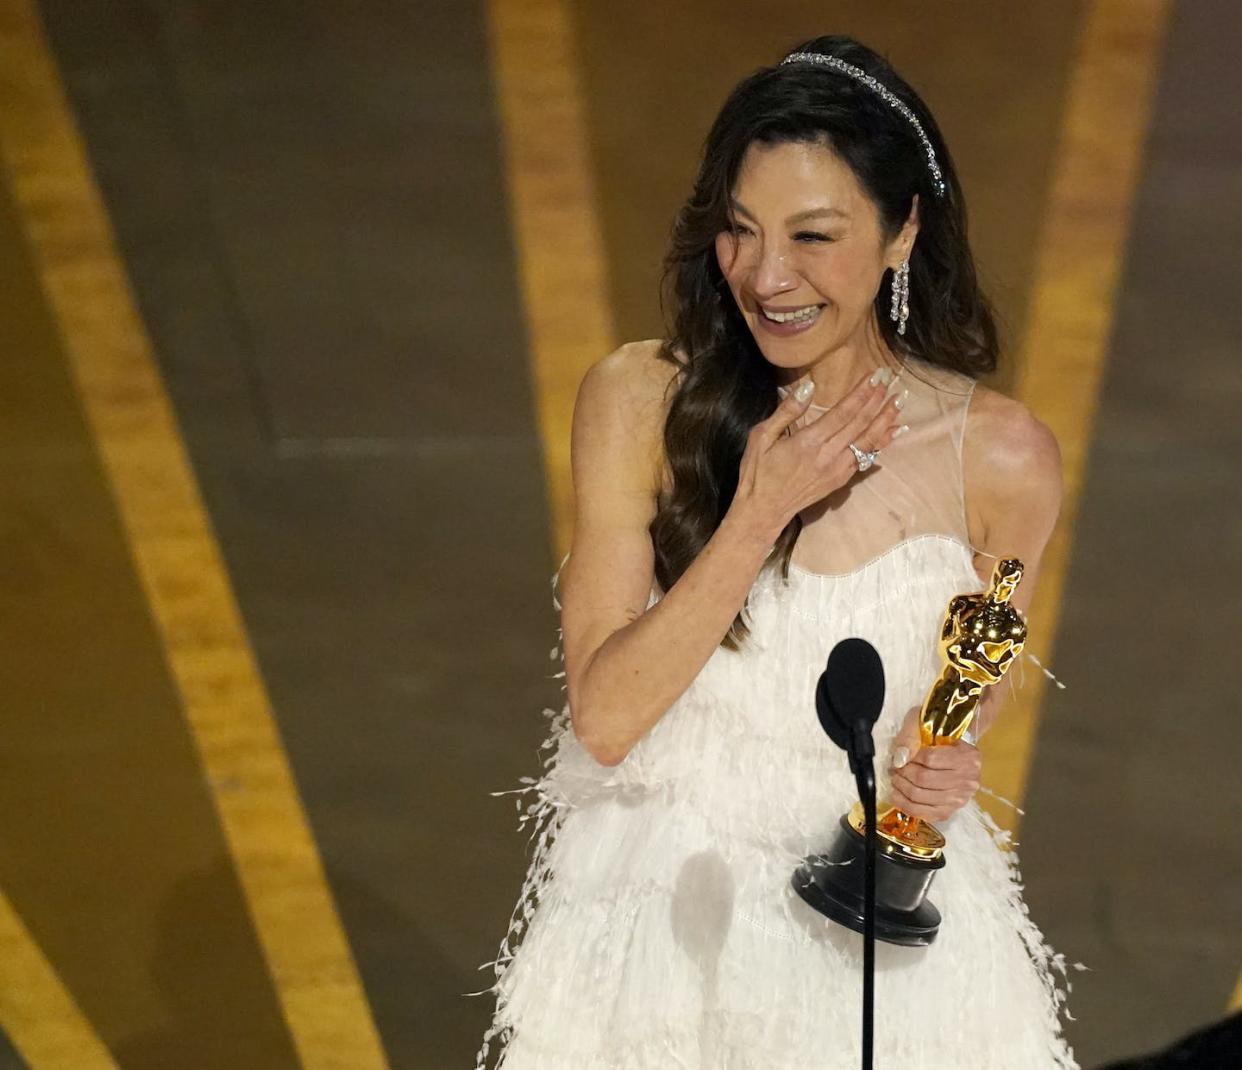 Michelle Yeoh accepts the award for best performance by an actress in a leading role for 'Everything Everywhere All at Once' at the Oscars on March 12, 2023, at the Dolby Theatre in Los Angeles. (AP Photo/Chris Pizzello)